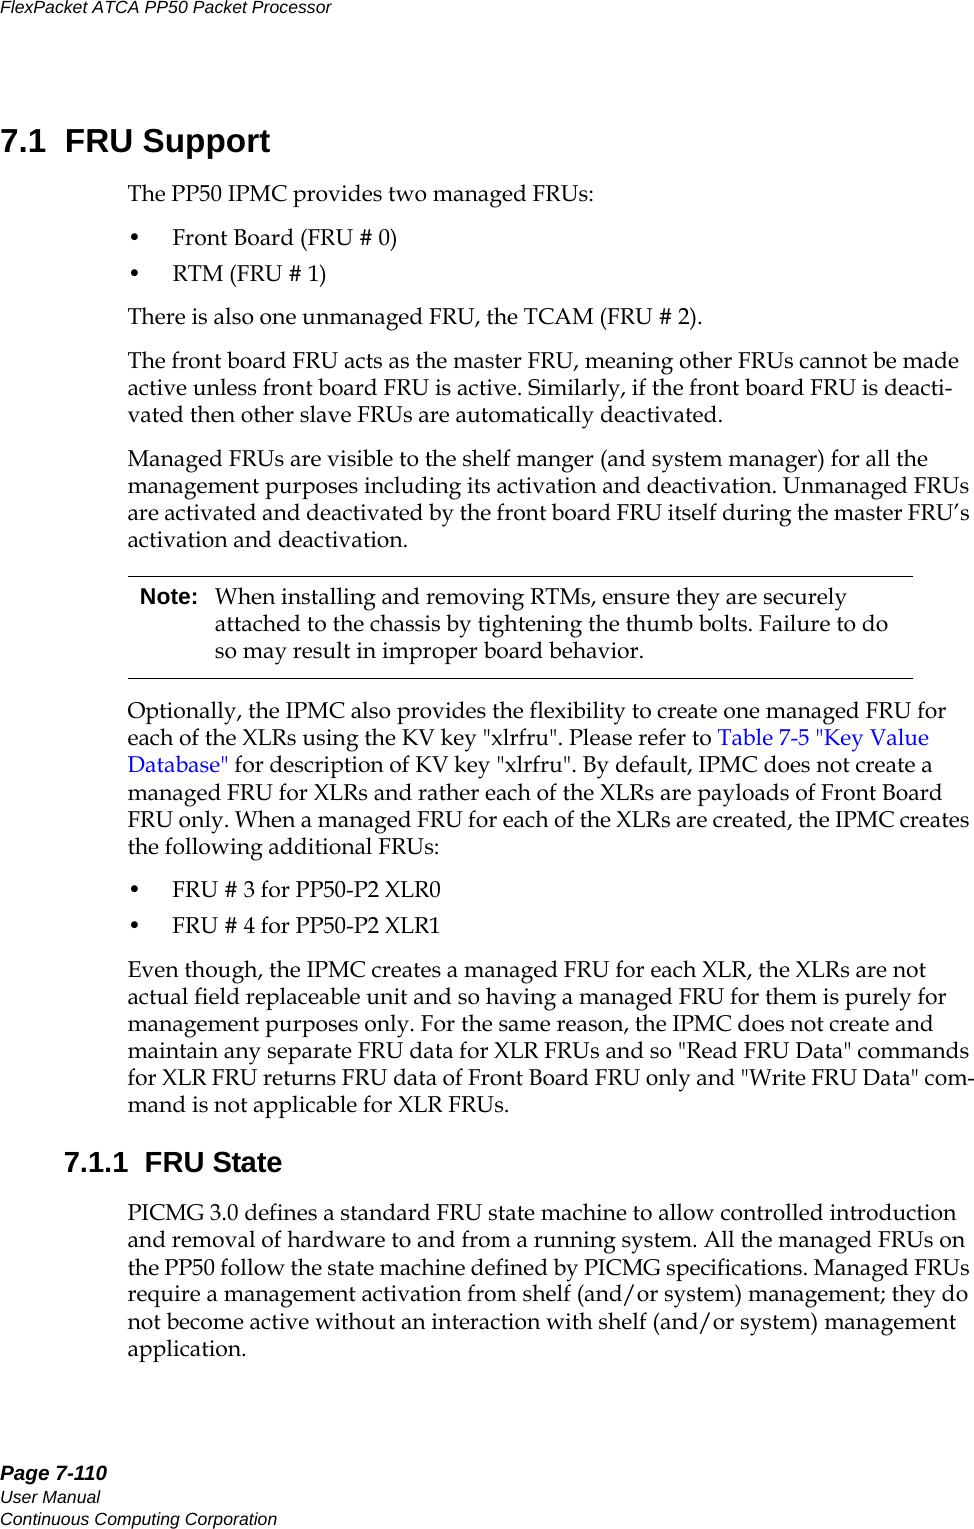 Page 7-110User ManualContinuous Computing CorporationFlexPacket ATCA PP50 Packet Processor     Preliminary7.1  FRU SupportThe PP50 IPMC provides two managed FRUs: • Front Board (FRU # 0)•RTM (FRU # 1)There is also one unmanaged FRU, the TCAM (FRU # 2). The front board FRU acts as the master FRU, meaning other FRUs cannot be made active unless front board FRU is active. Similarly, if the front board FRU is deacti-vated then other slave FRUs are automatically deactivated.Managed FRUs are visible to the shelf manger (and system manager) for all the management purposes including its activation and deactivation. Unmanaged FRUs are activated and deactivated by the front board FRU itself during the master FRU’s activation and deactivation.Optionally, the IPMC also provides the flexibility to create one managed FRU for each of the XLRs using the KV key &quot;xlrfru&quot;. Please refer to Table 7-5 &quot;Key Value Database&quot; for description of KV key &quot;xlrfru&quot;. By default, IPMC does not create a managed FRU for XLRs and rather each of the XLRs are payloads of Front Board FRU only. When a managed FRU for each of the XLRs are created, the IPMC creates the following additional FRUs: • FRU # 3 for PP50-P2 XLR0 • FRU # 4 for PP50-P2 XLR1Even though, the IPMC creates a managed FRU for each XLR, the XLRs are not actual field replaceable unit and so having a managed FRU for them is purely for management purposes only. For the same reason, the IPMC does not create and maintain any separate FRU data for XLR FRUs and so &quot;Read FRU Data&quot; commands for XLR FRU returns FRU data of Front Board FRU only and &quot;Write FRU Data&quot; com-mand is not applicable for XLR FRUs.7.1.1  FRU StatePICMG 3.0 defines a standard FRU state machine to allow controlled introduction and removal of hardware to and from a running system. All the managed FRUs on the PP50 follow the state machine defined by PICMG specifications. Managed FRUs require a management activation from shelf (and/or system) management; they do not become active without an interaction with shelf (and/or system) management application.Note: When installing and removing RTMs, ensure they are securely attached to the chassis by tightening the thumb bolts. Failure to do so may result in improper board behavior.